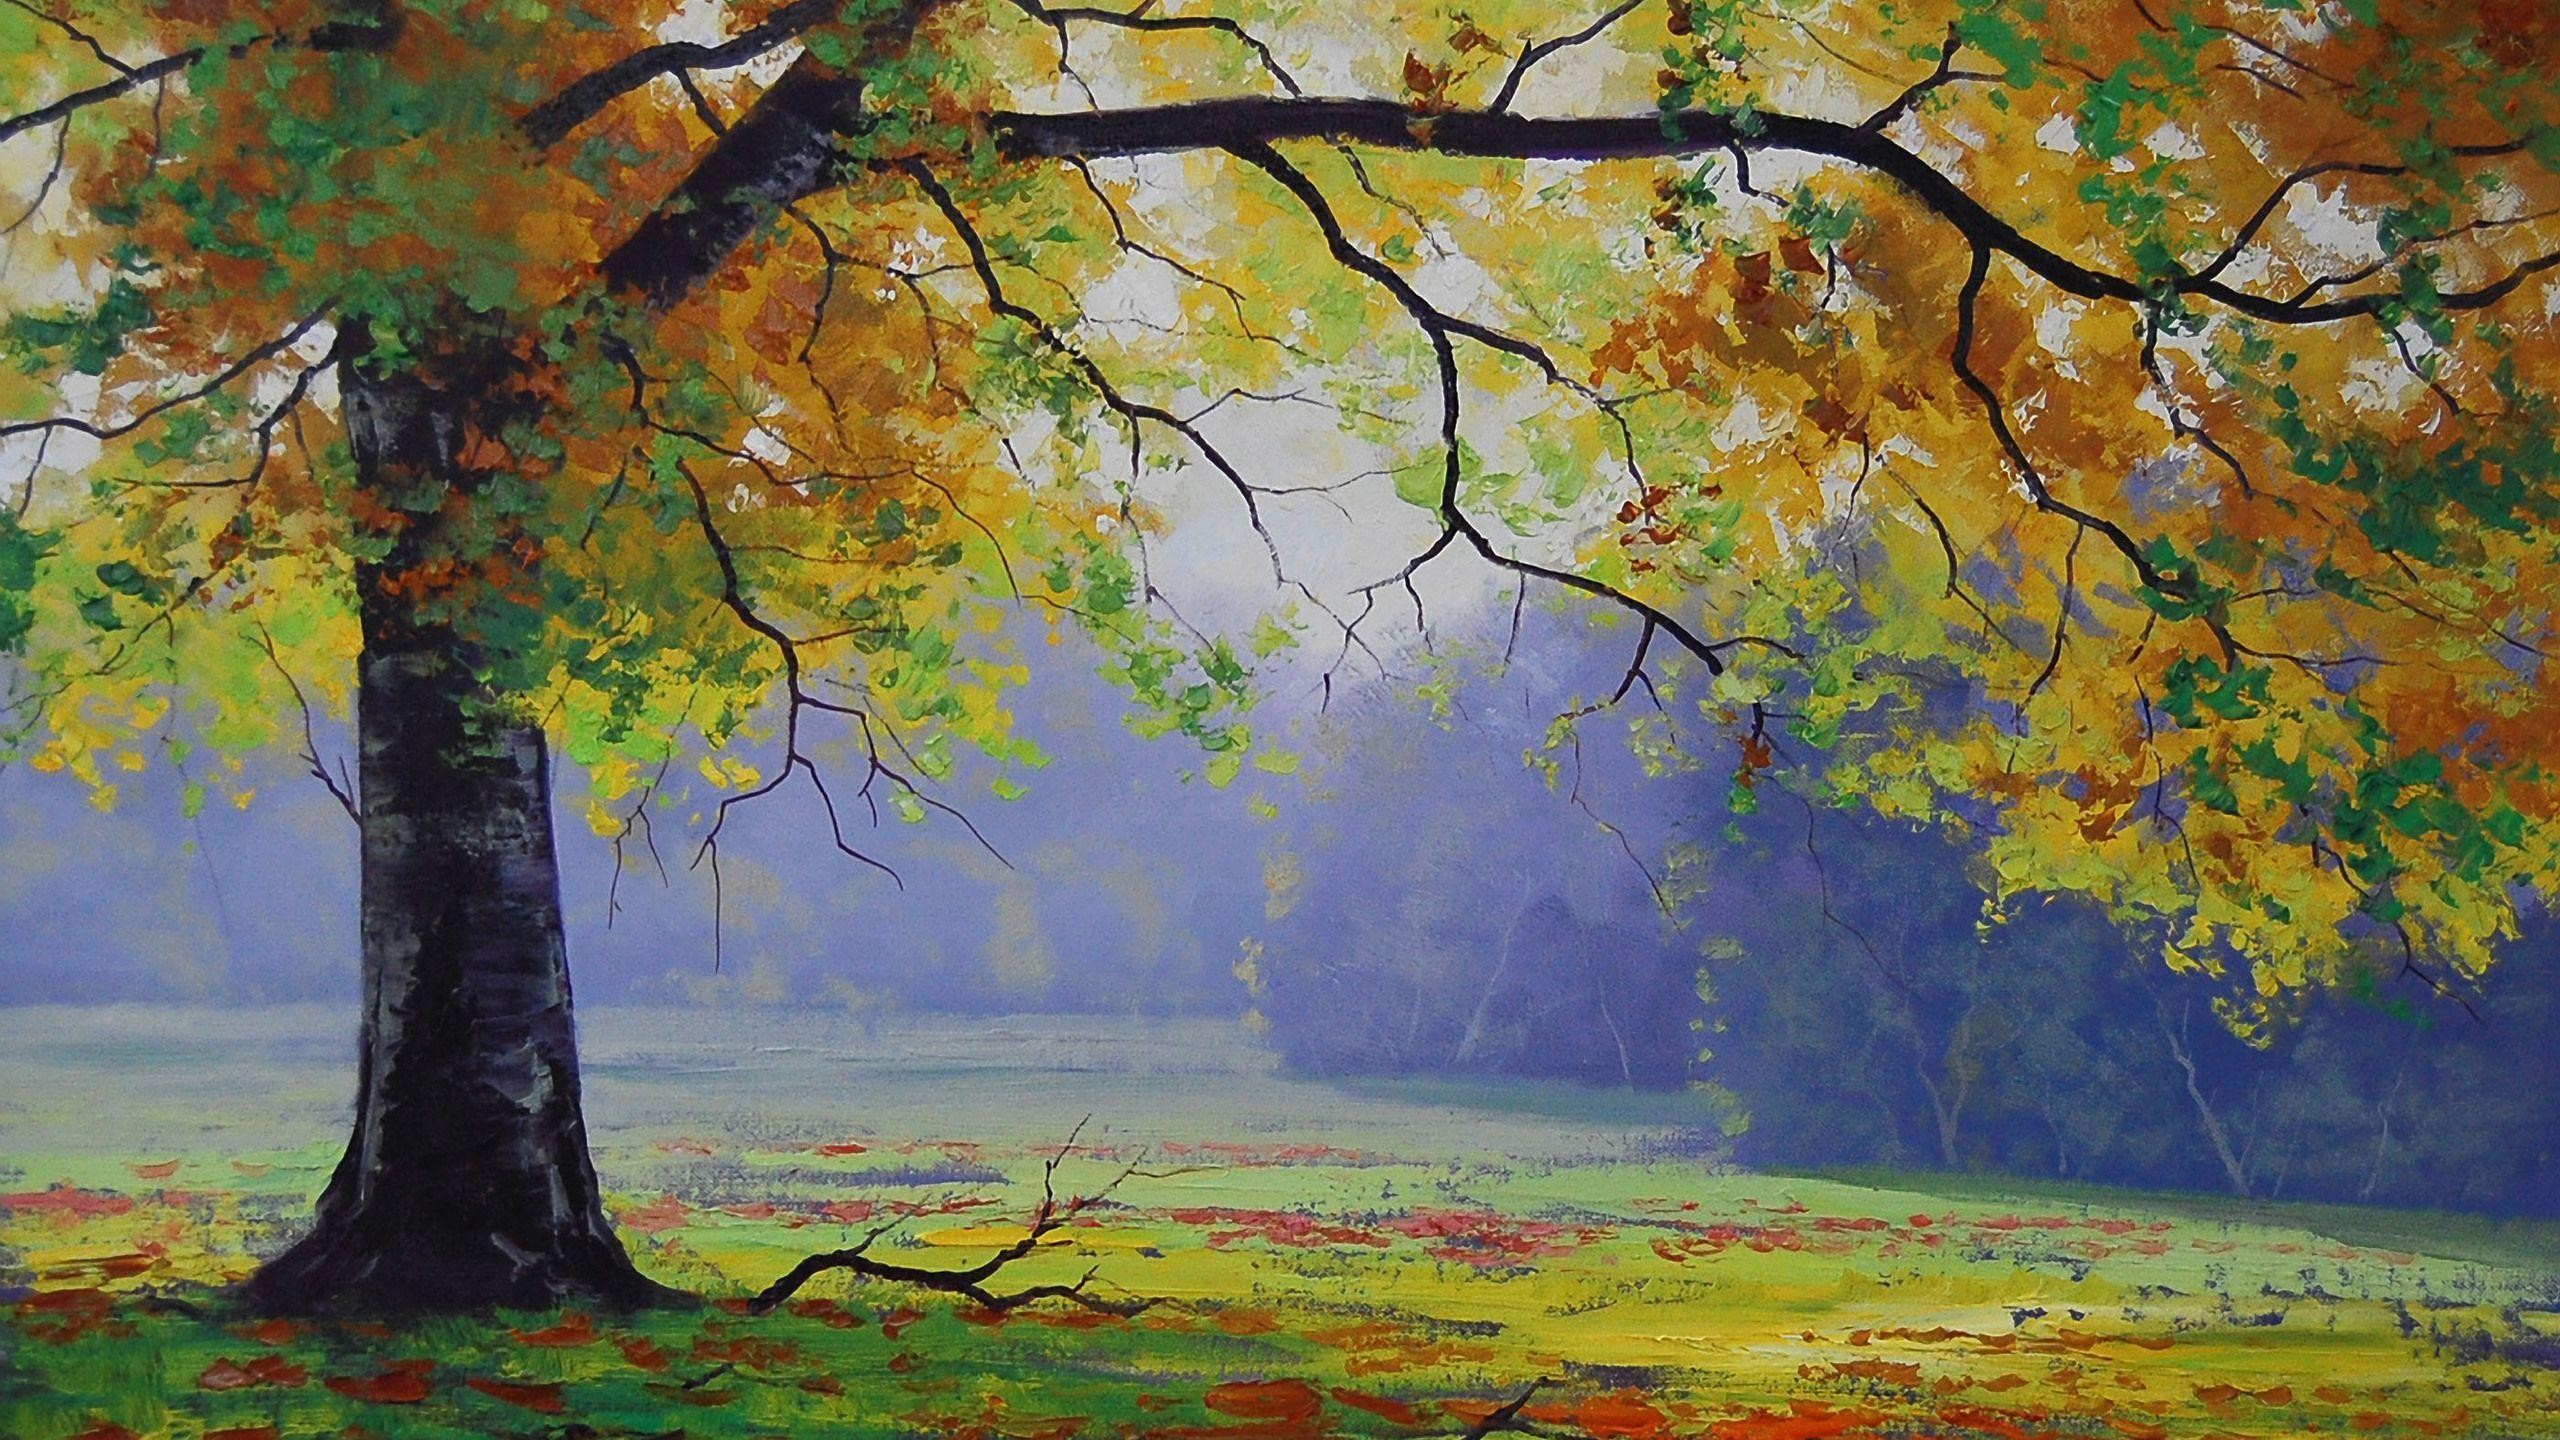 General 2560x1440 painting nature trees leaves artwork